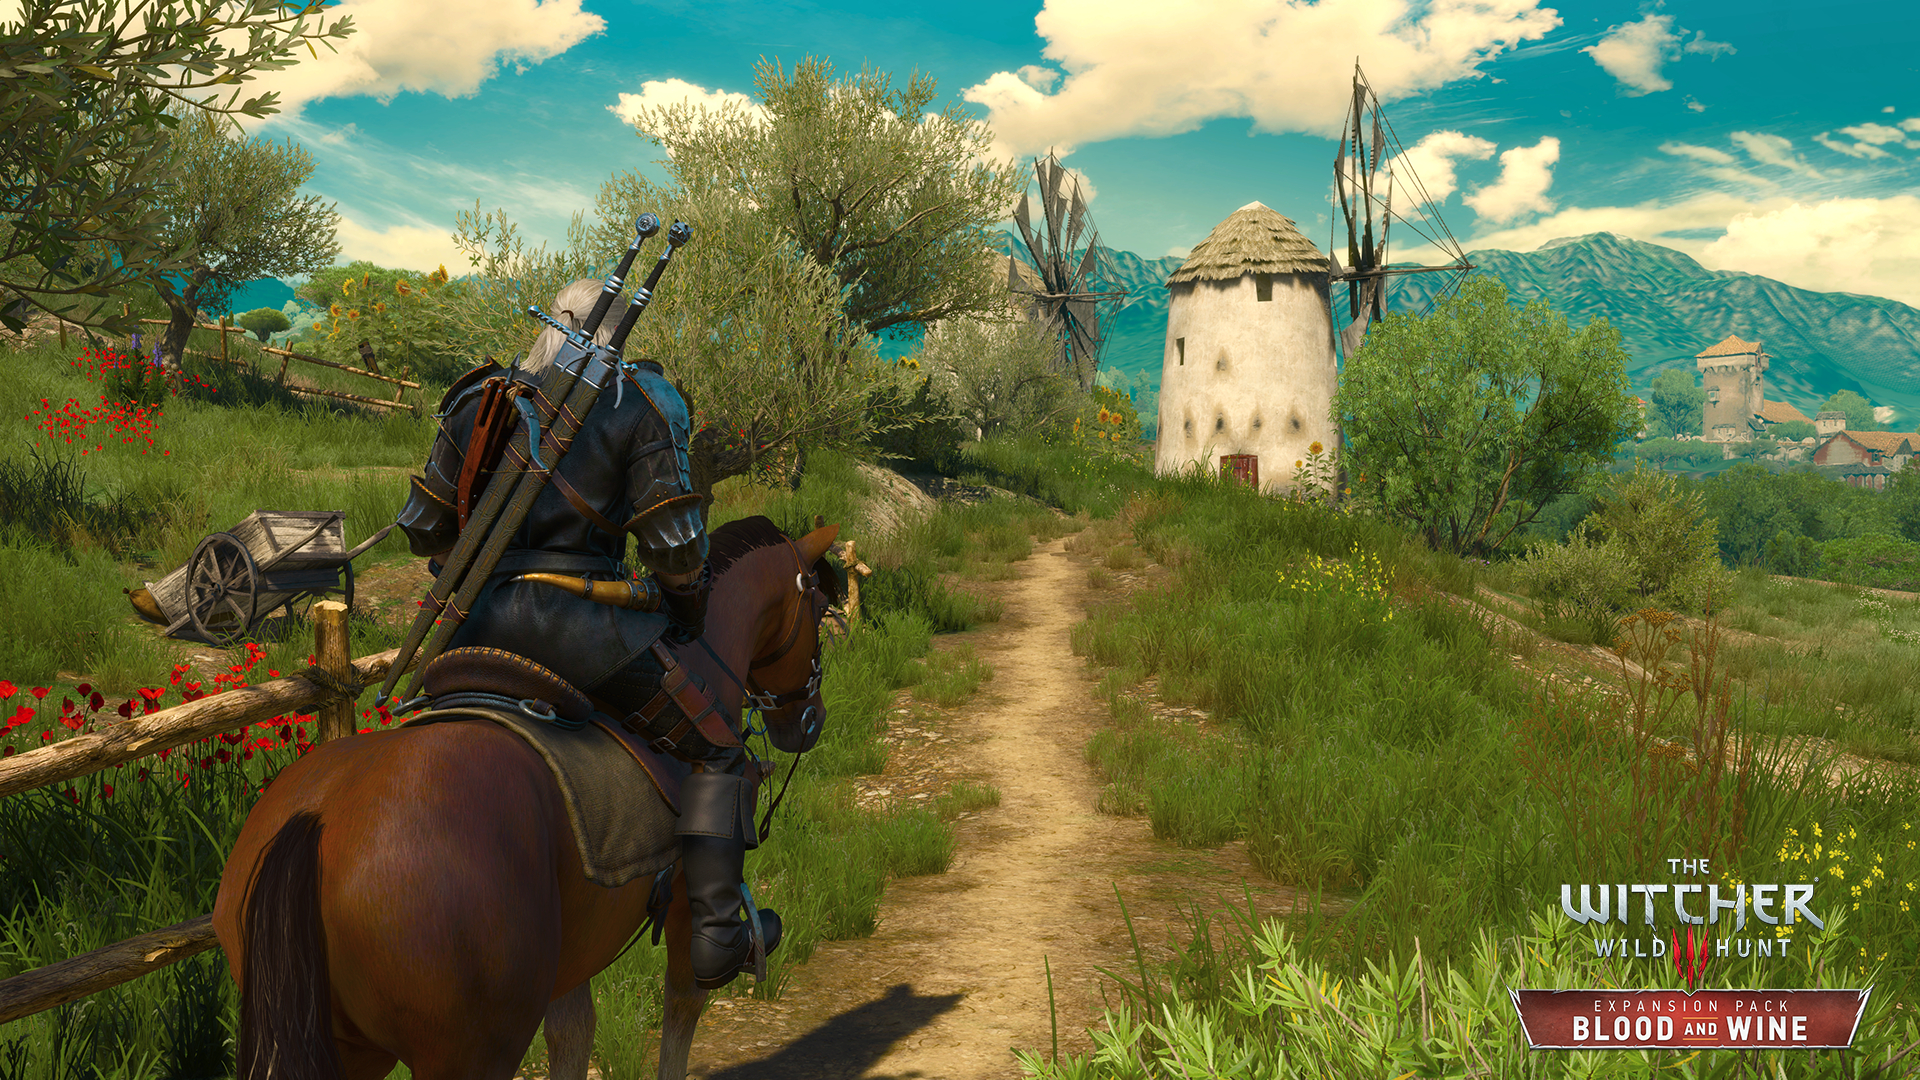 The witcher 3 blood and wine soundtrack фото 54